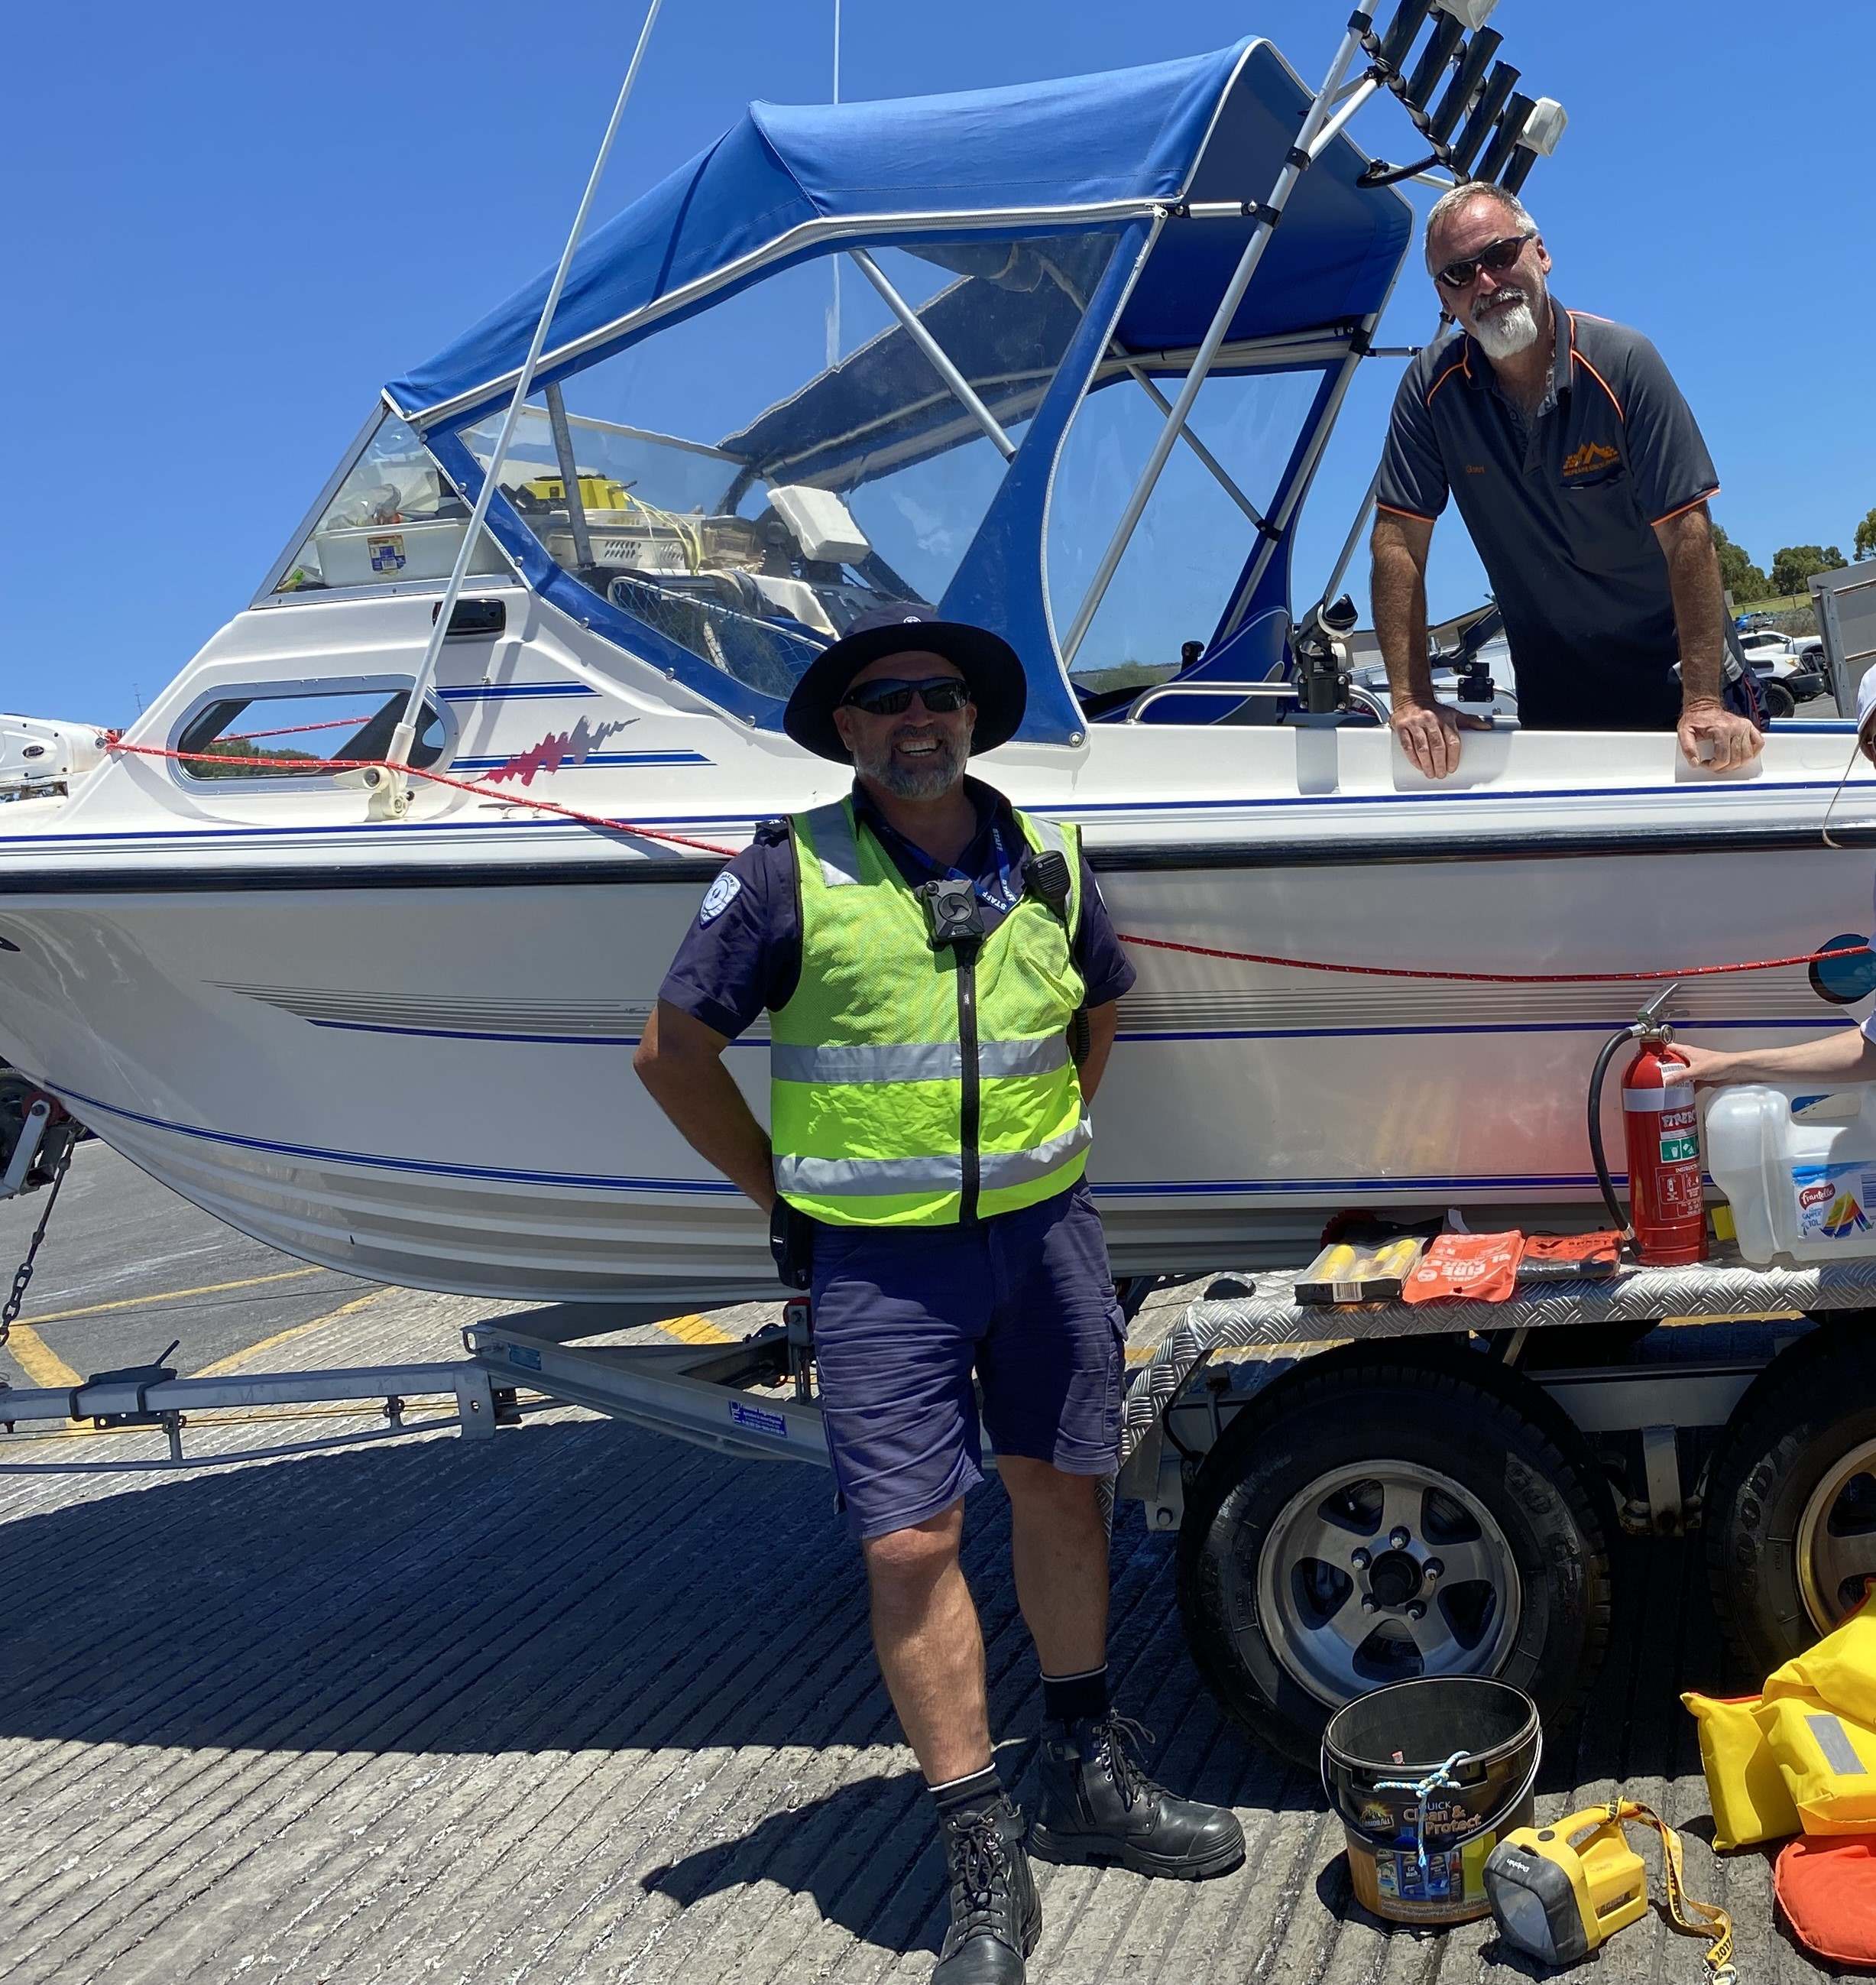 Marine Safety Officer in front of a boat at a boat ramp with a boater in the boat with safety equipment lying on the ground